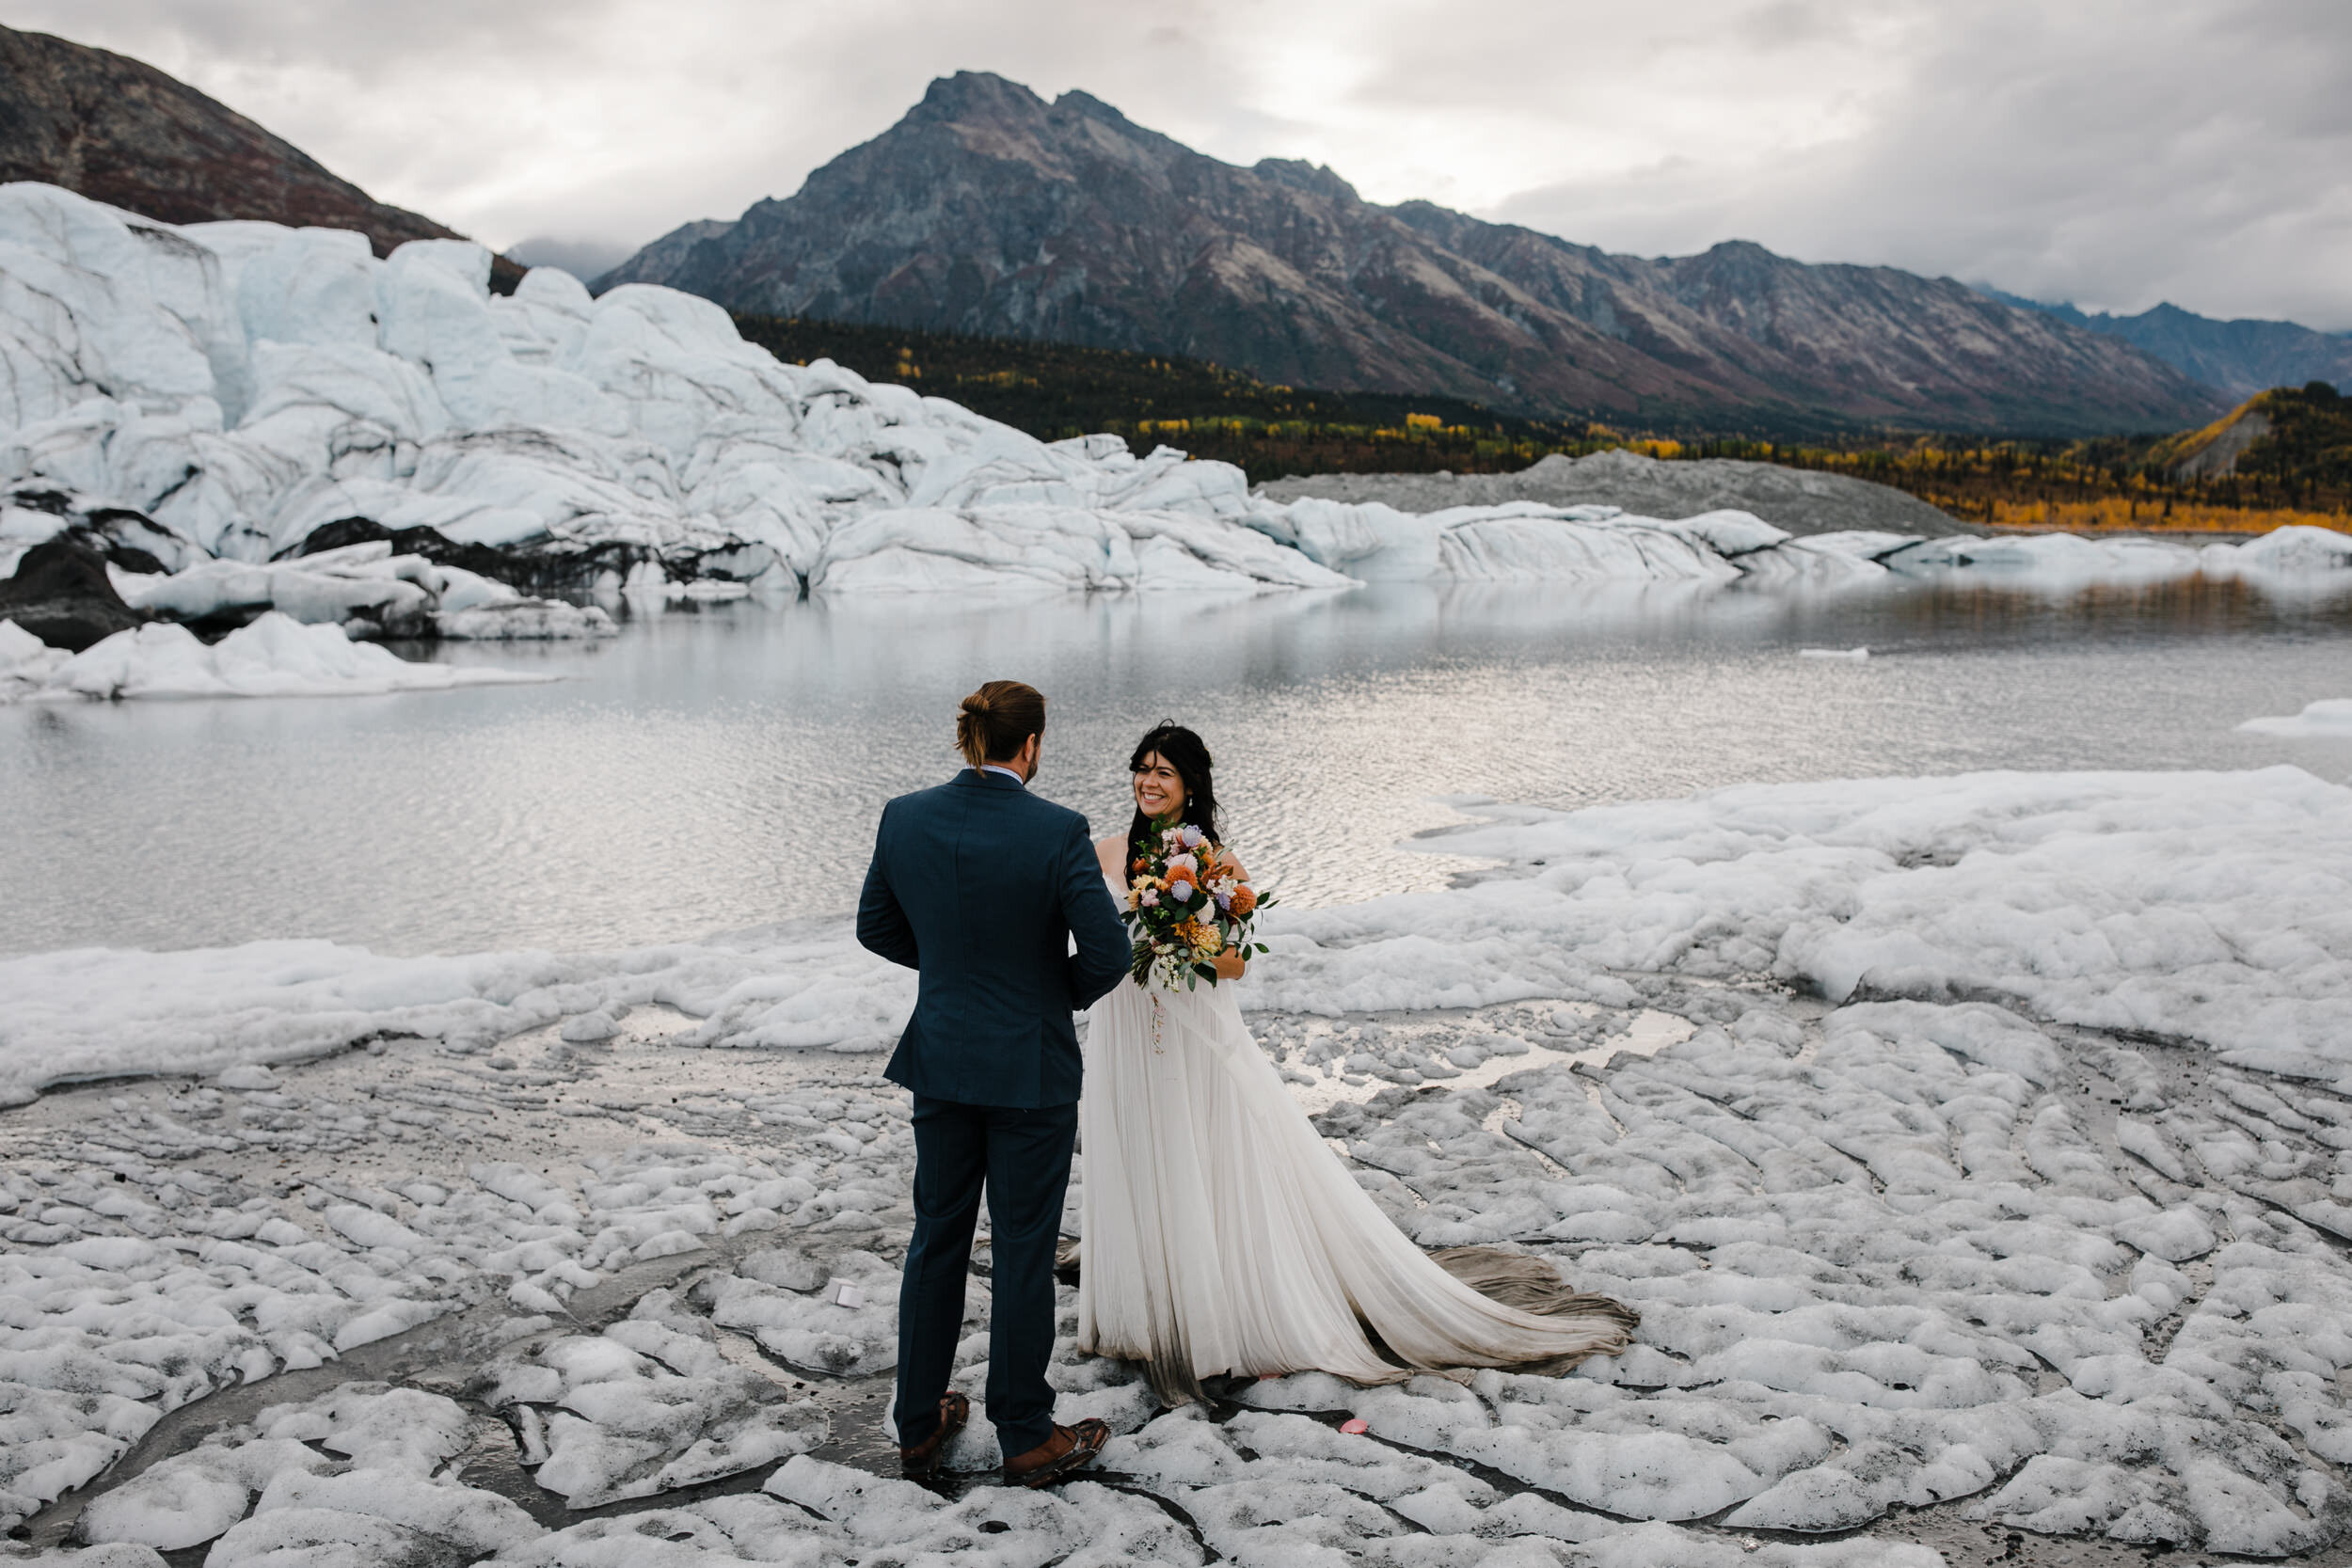 Intimate Elopement | Fall Colors in Alaska | The Hearnes Photography